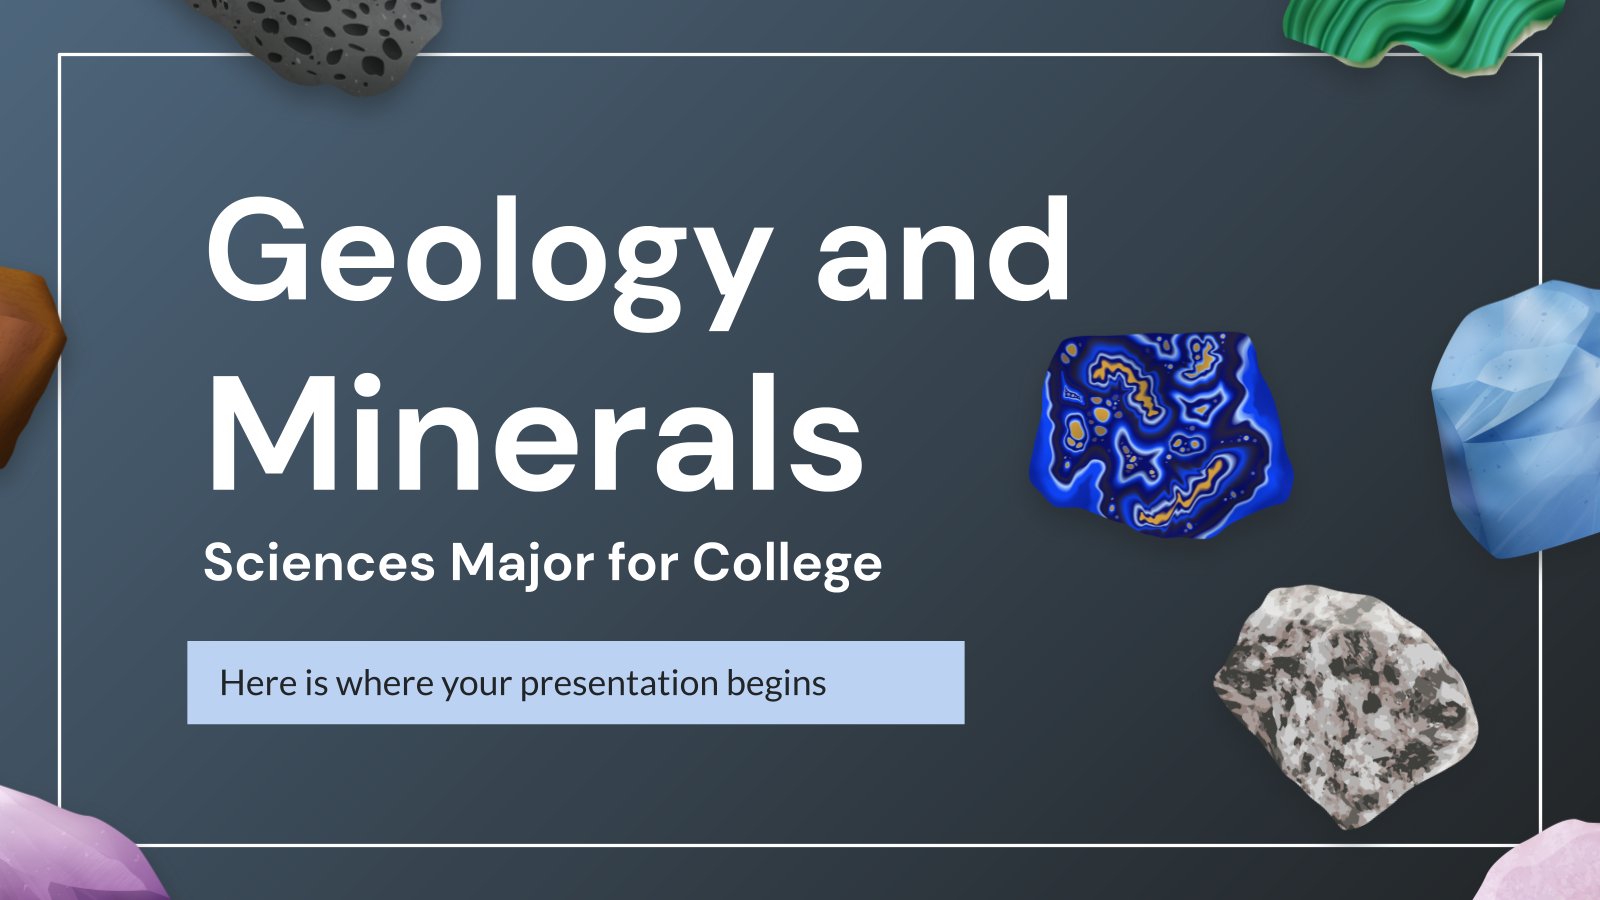 Geology and Minerals Sciences Major for College presentation template 